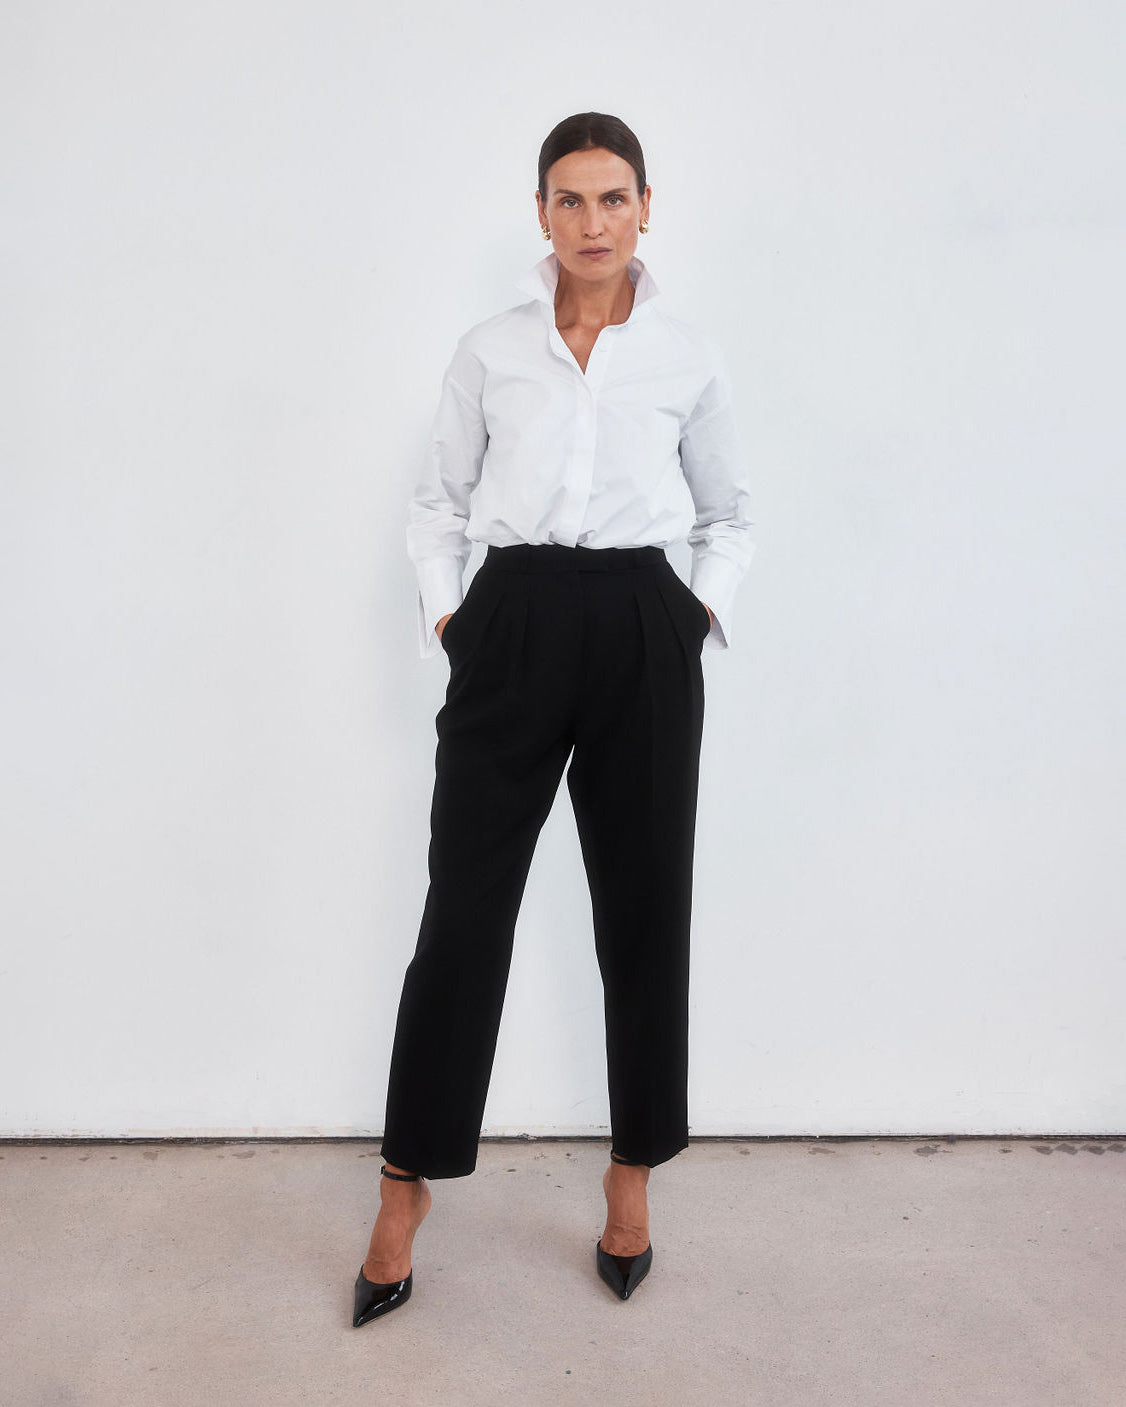 Middle aged women with brown pulled back hair wearing a crisp white shirt with the collar lifted up, neatly tucked into a pair of high-waisted black peg leg trousers which crop just above the ankle